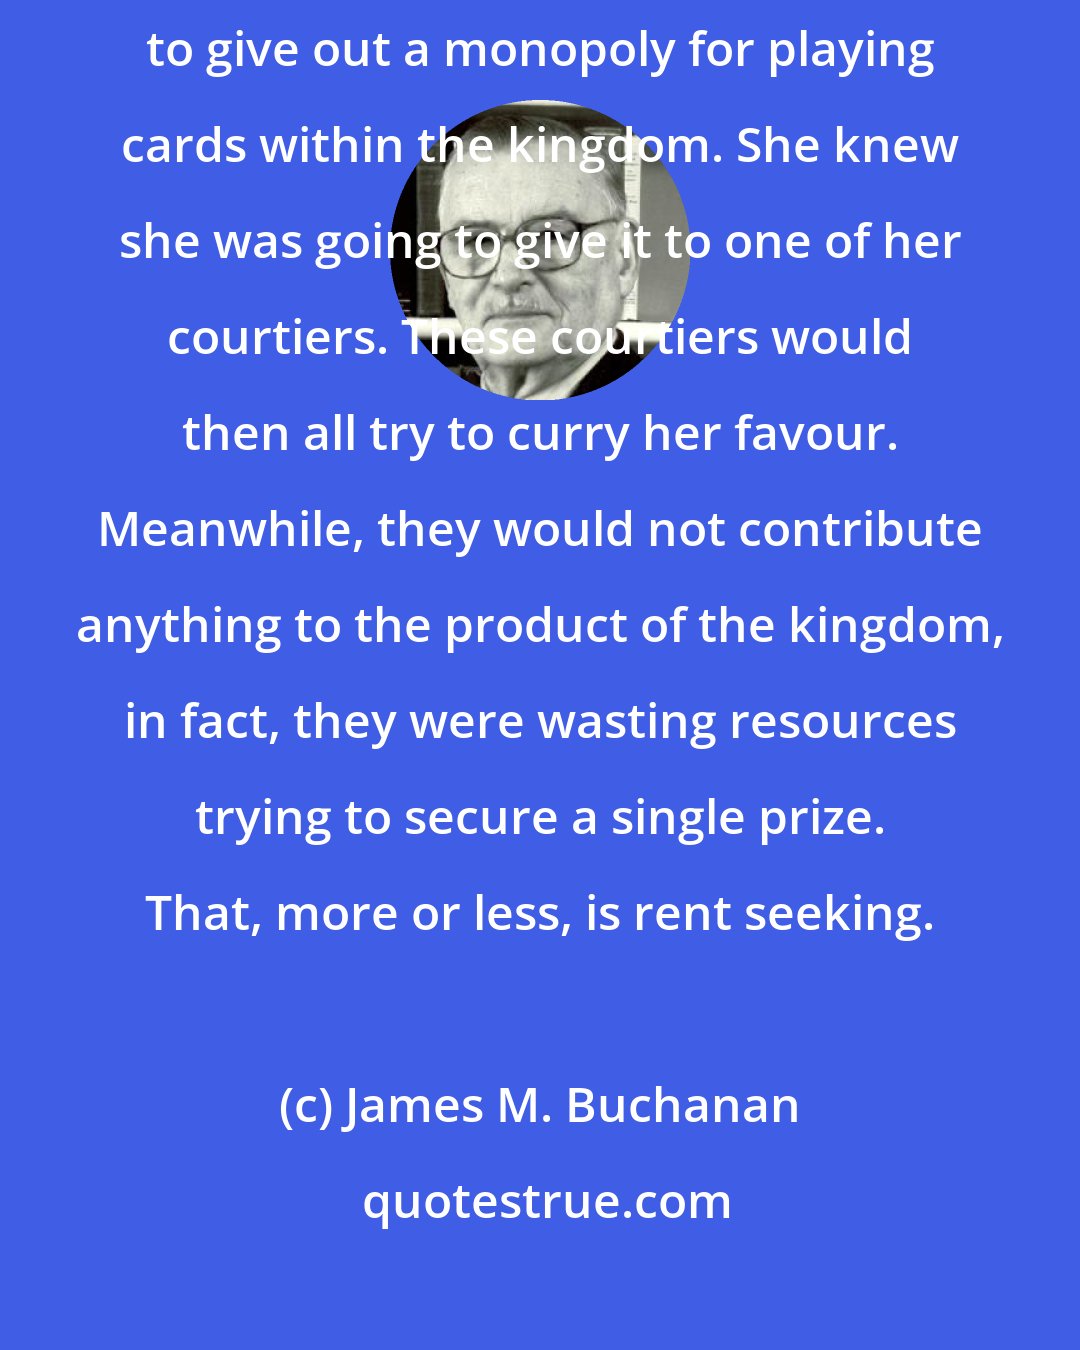 James M. Buchanan: Imagine that Queen Elizabeth I, in her time, had the opportunity to give out a monopoly for playing cards within the kingdom. She knew she was going to give it to one of her courtiers. These courtiers would then all try to curry her favour. Meanwhile, they would not contribute anything to the product of the kingdom, in fact, they were wasting resources trying to secure a single prize. That, more or less, is rent seeking.